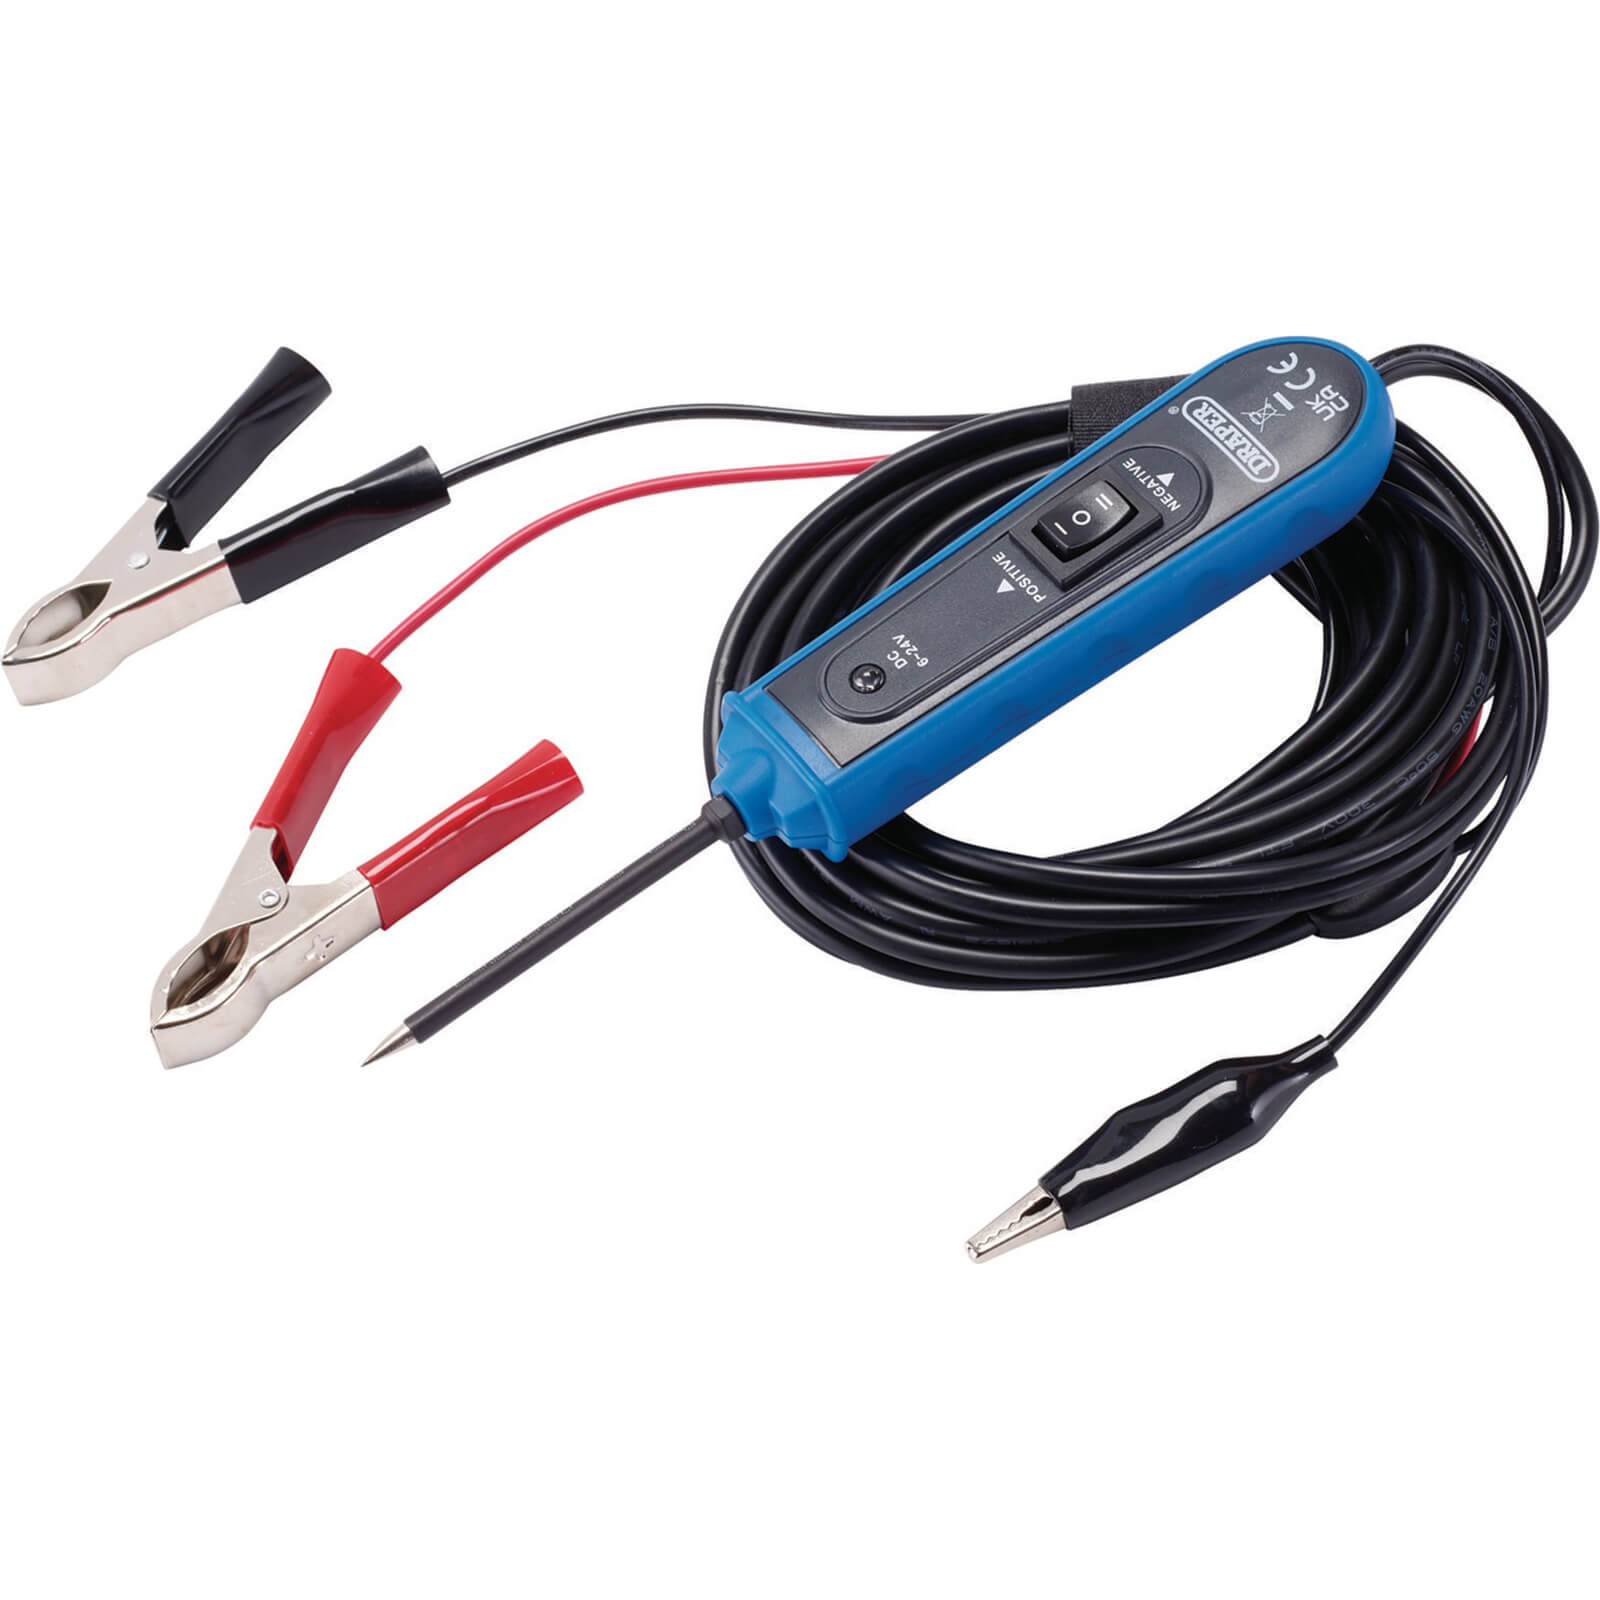 Image of Draper 6-24v Auto Probe DC Power Circuit Electrical Tester